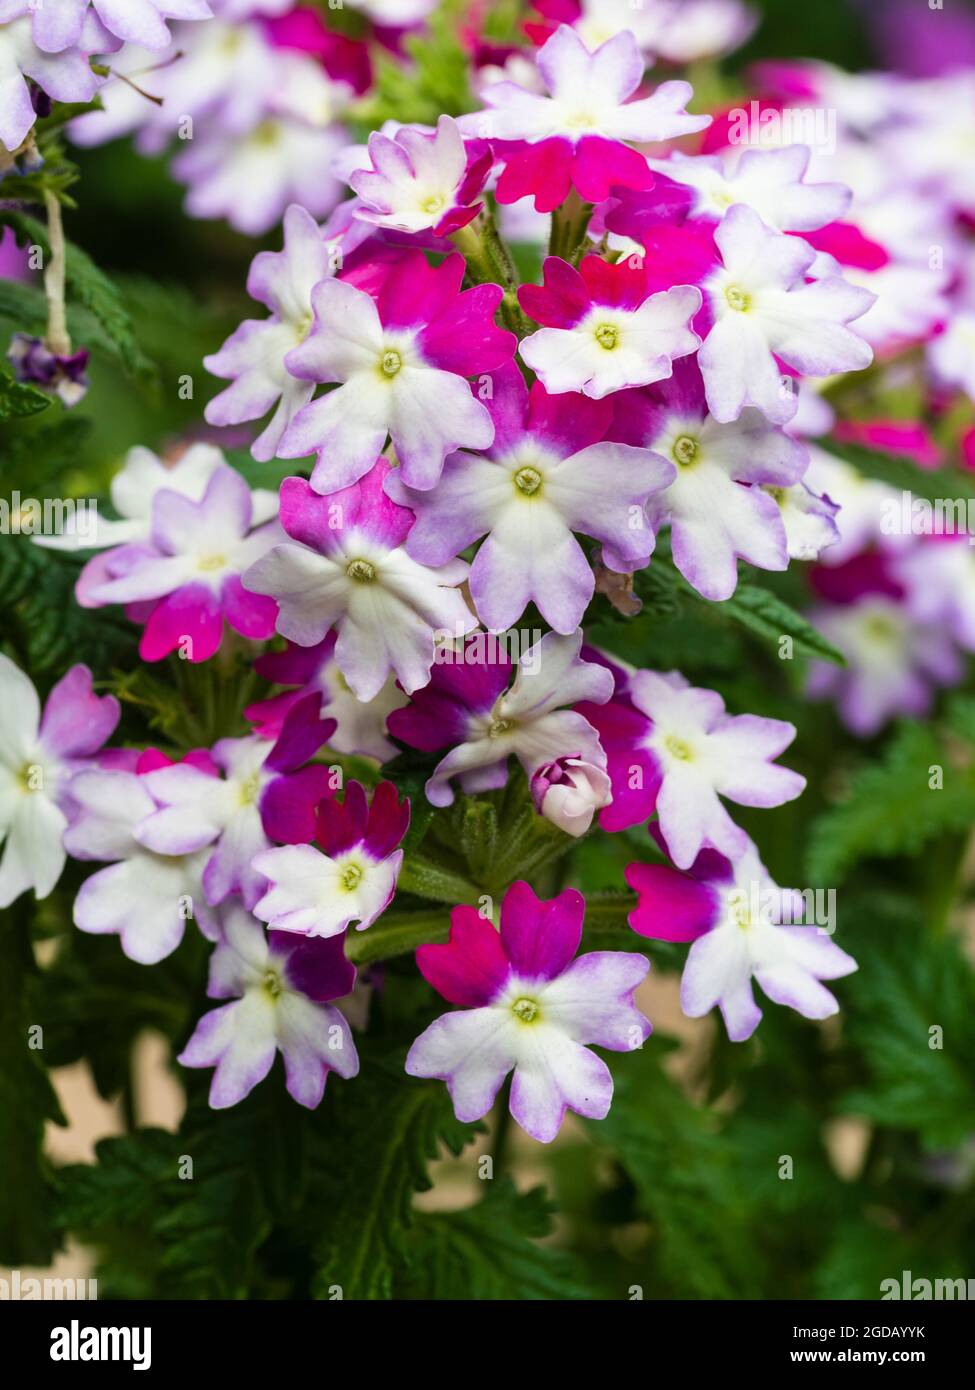 Striking white, red and purple flowers of the tender summer flowering container plant, Verbena 'Sparkle Purple Blues' Stock Photo